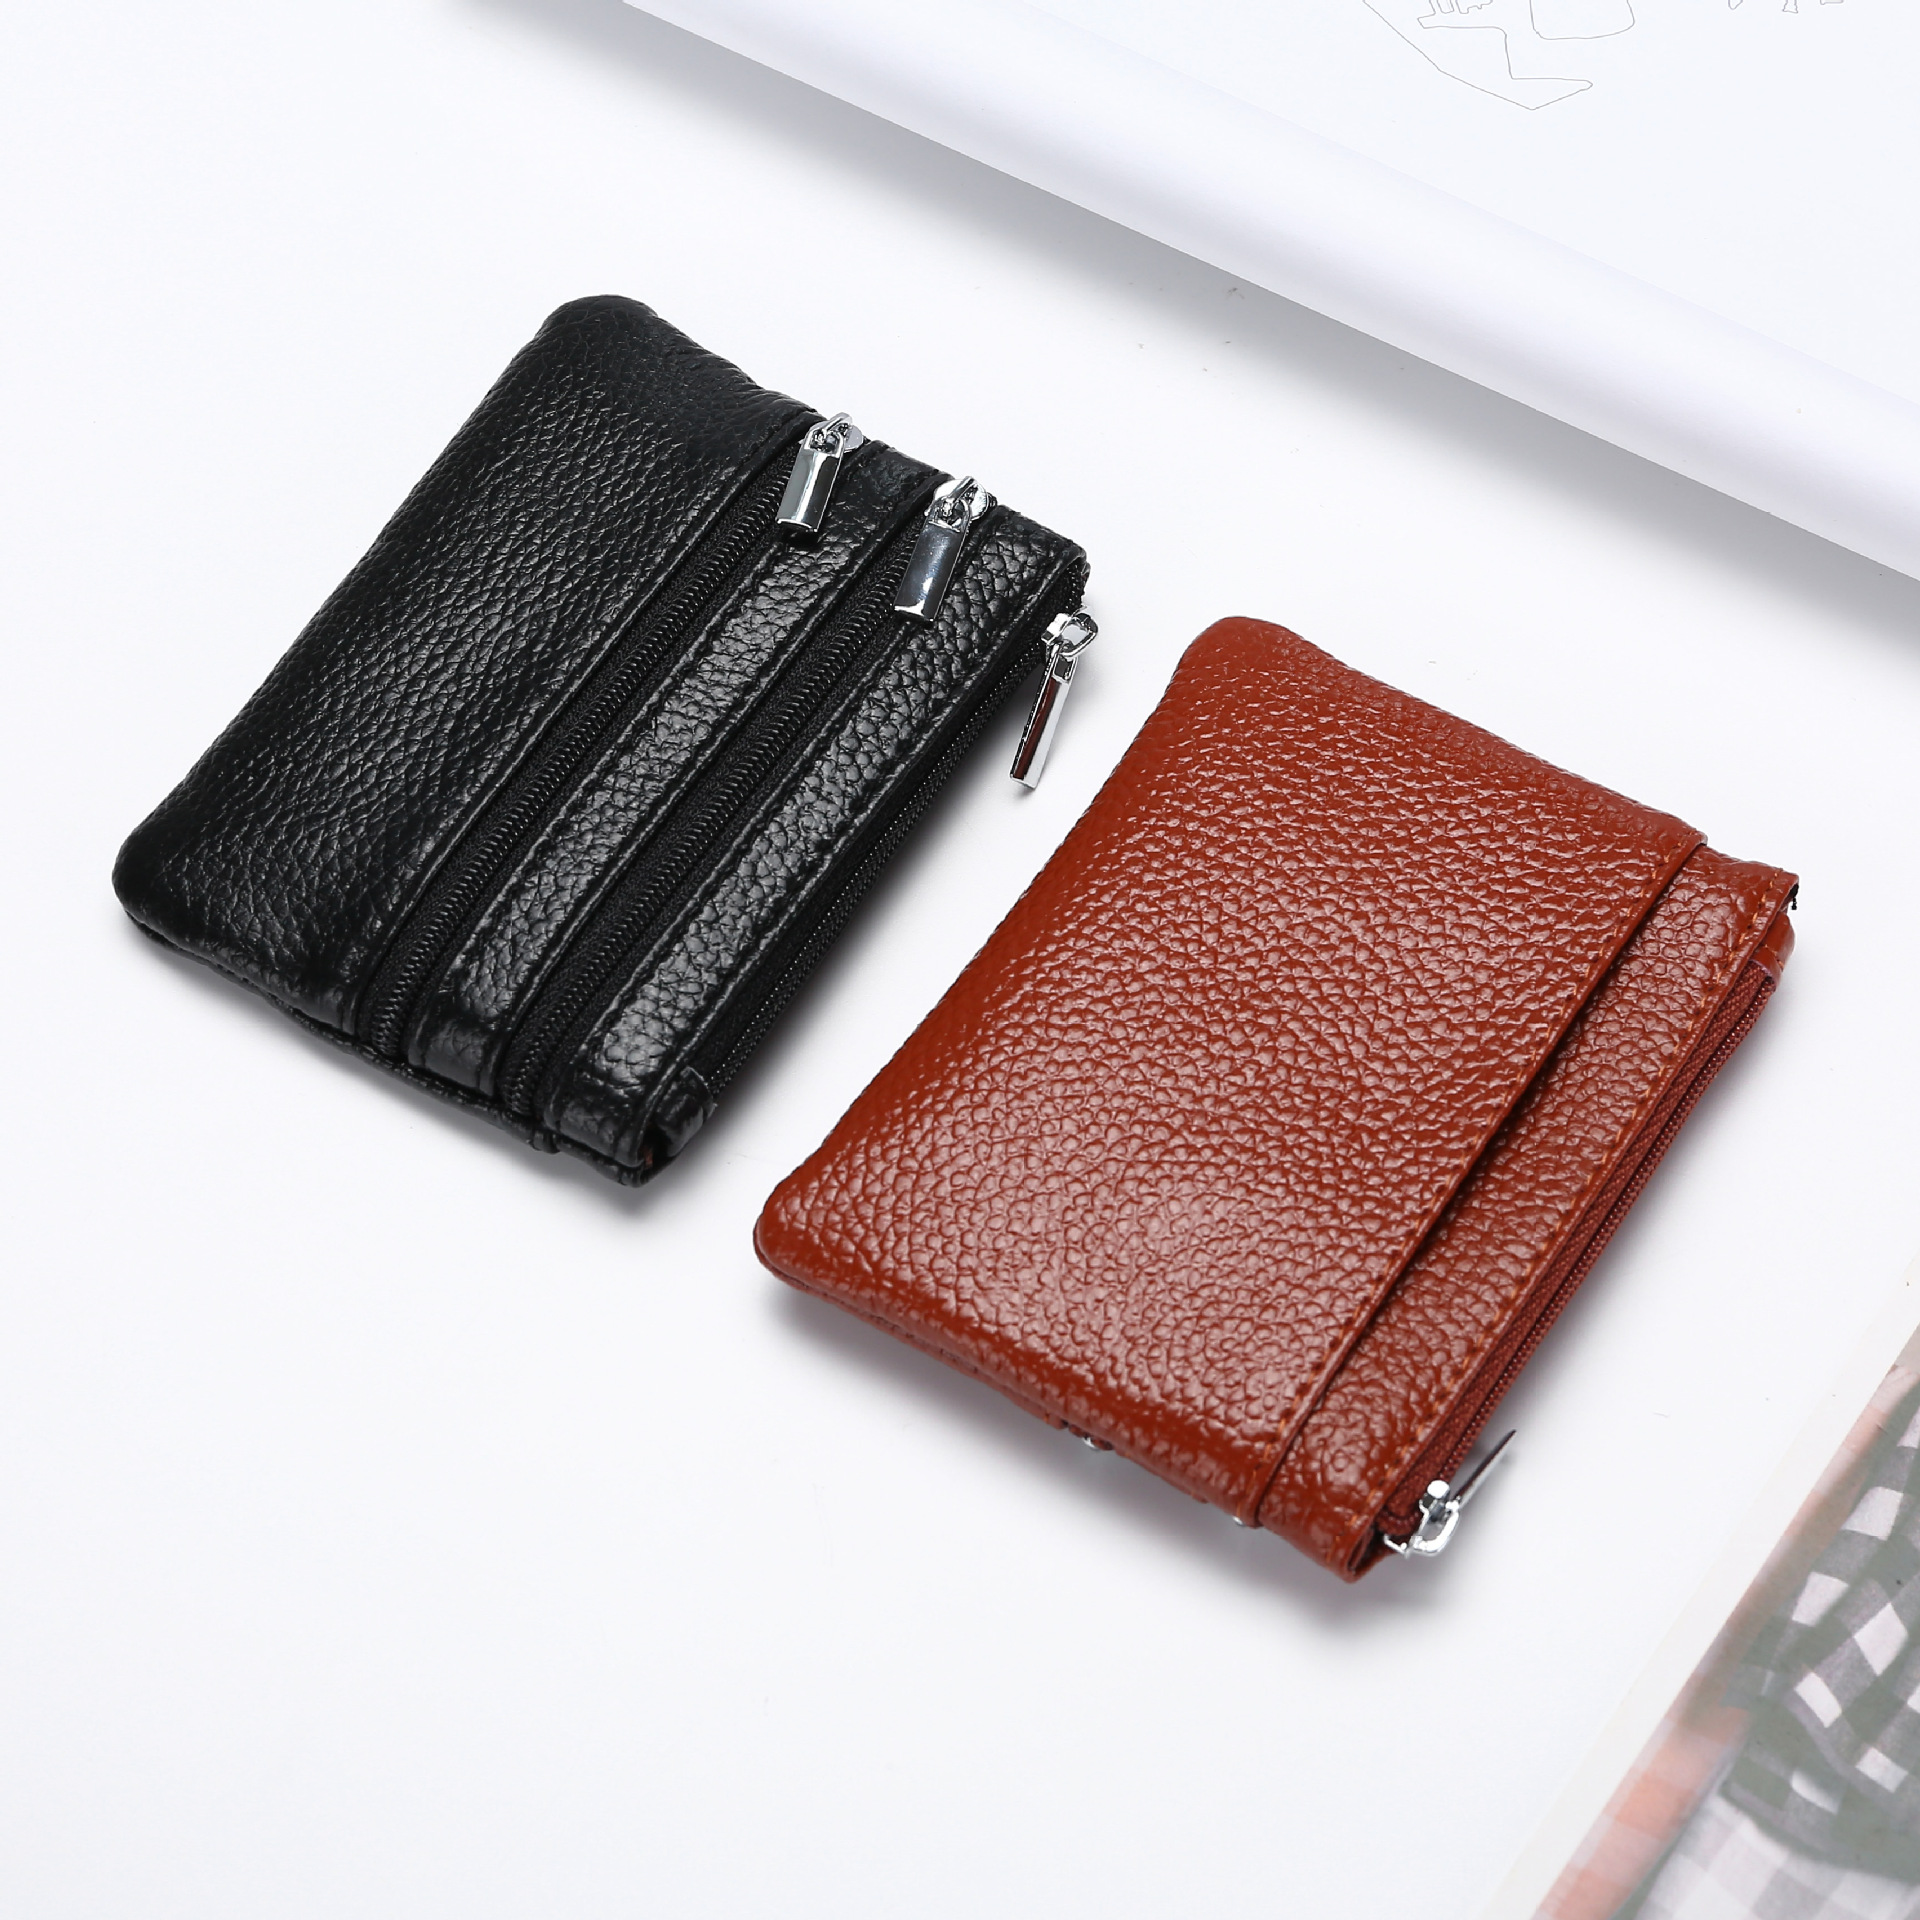 European American Style Multi-Functional Women's Genuine Leather Coin Purse Business Card Holder Short Wallet Key Case Small Wallet for Women